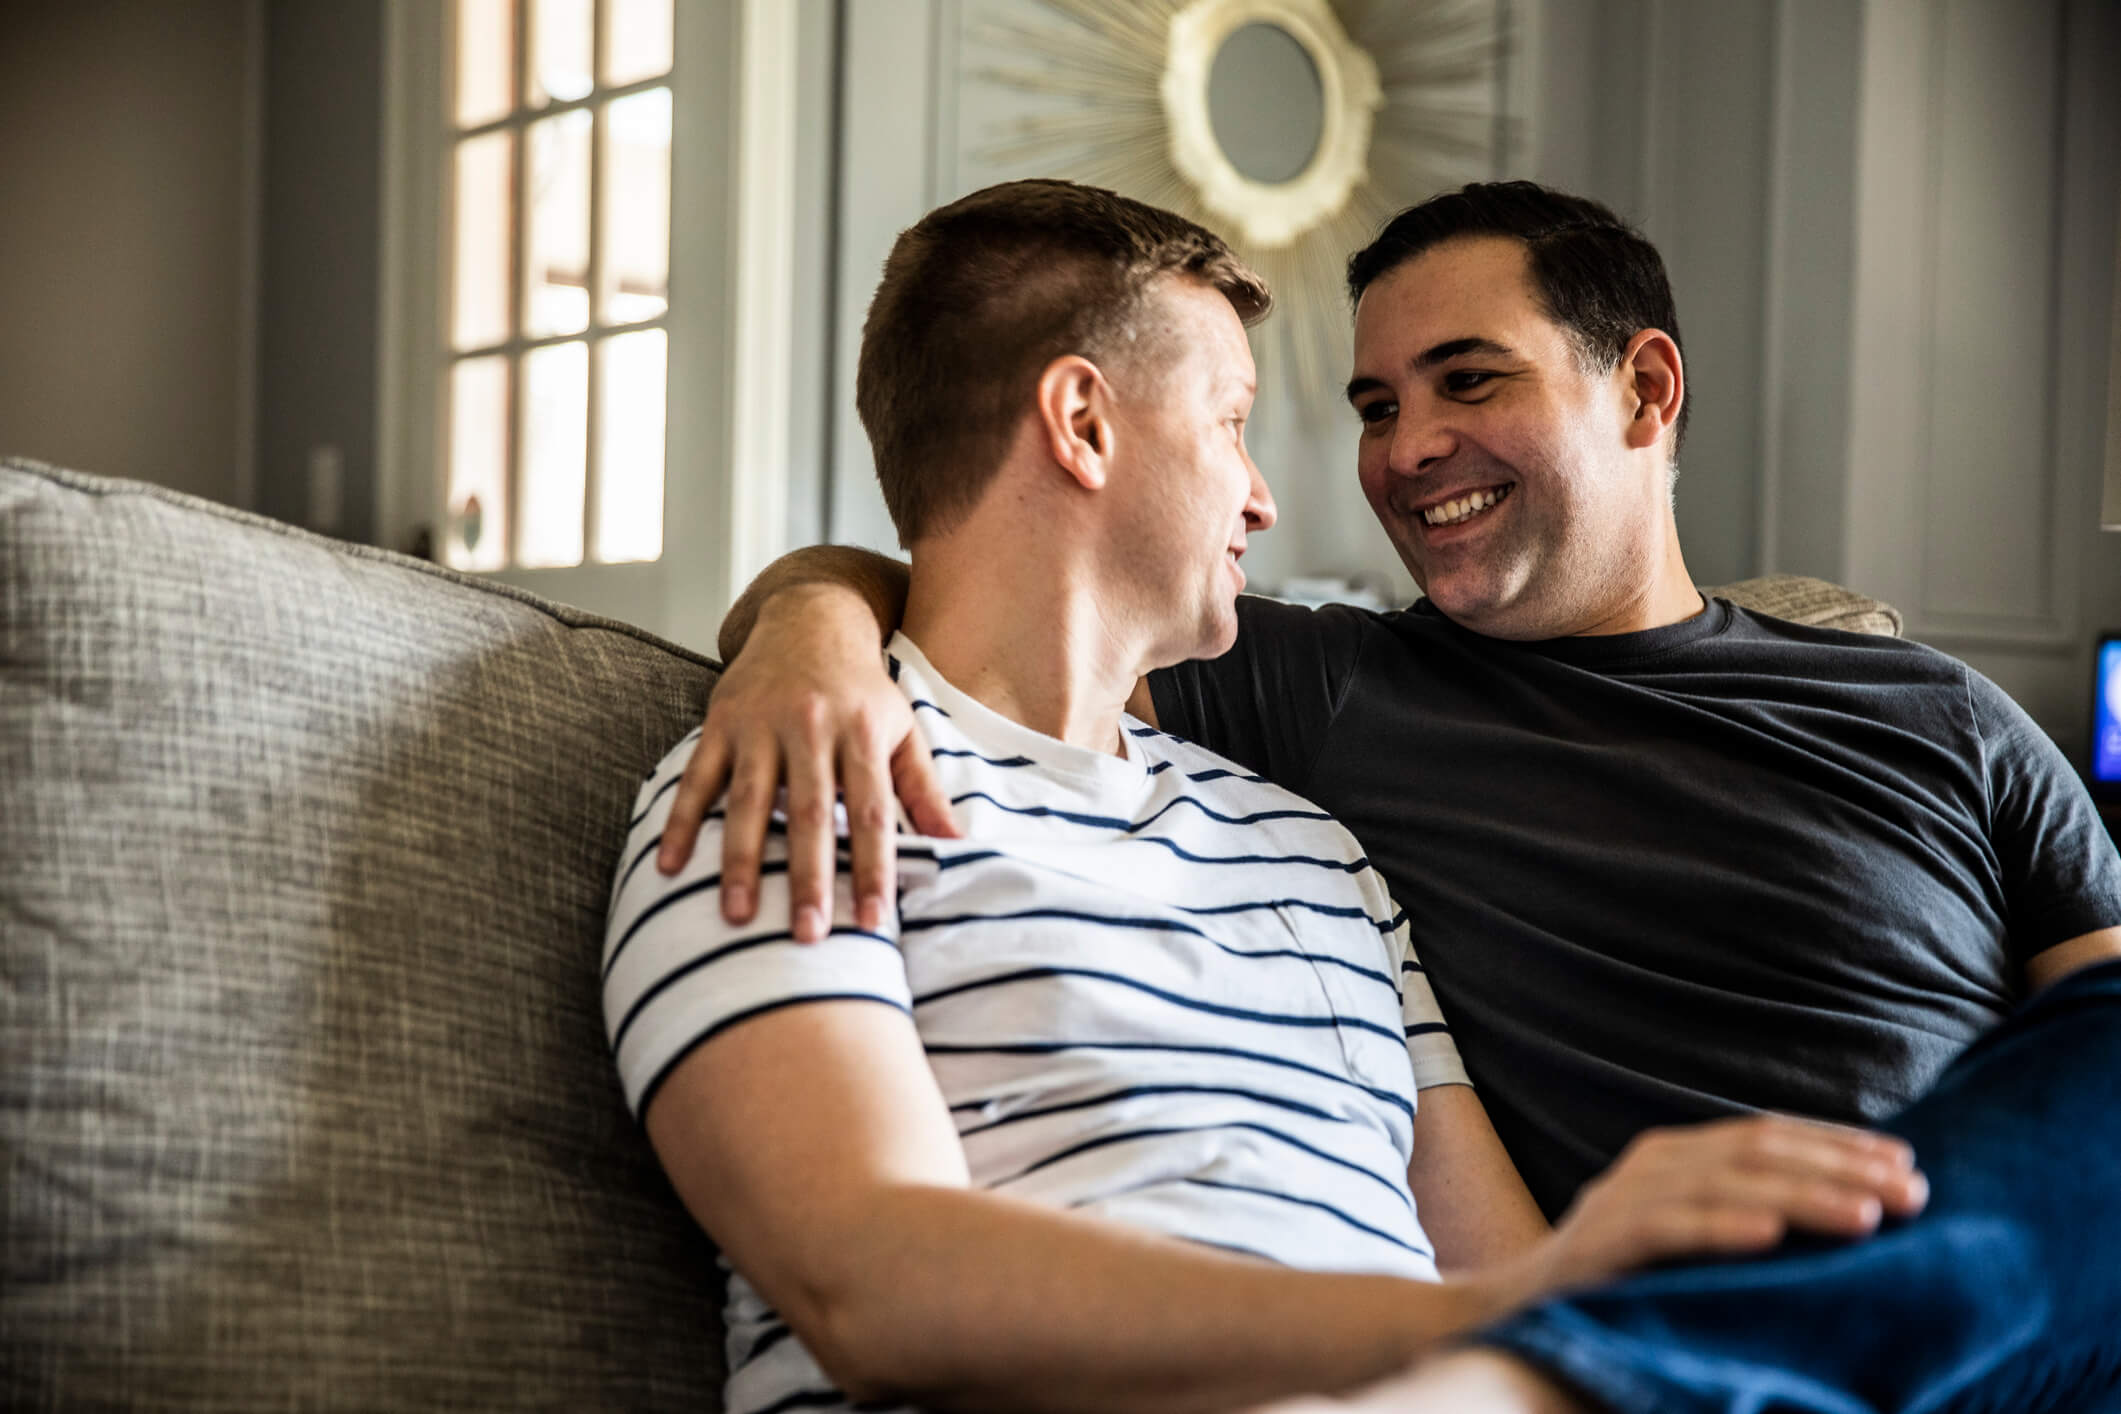 Two men are sitting on a couch and looking into each other’s eyes; one has his arm around the other one and they are both smiling.